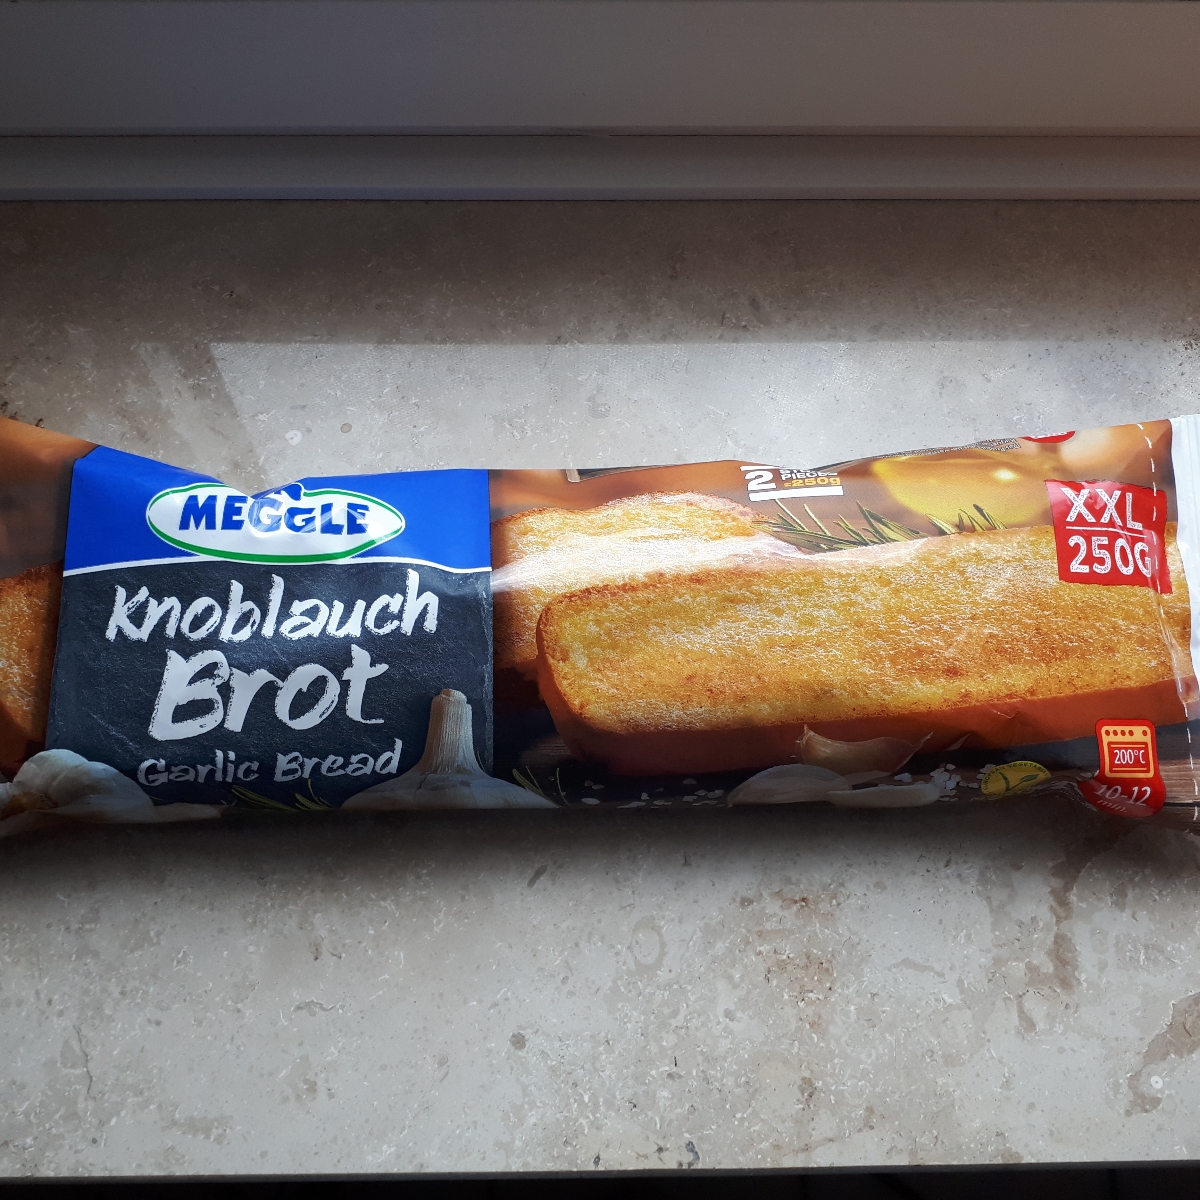 Meggle Knoblauch Brot Review | abillion